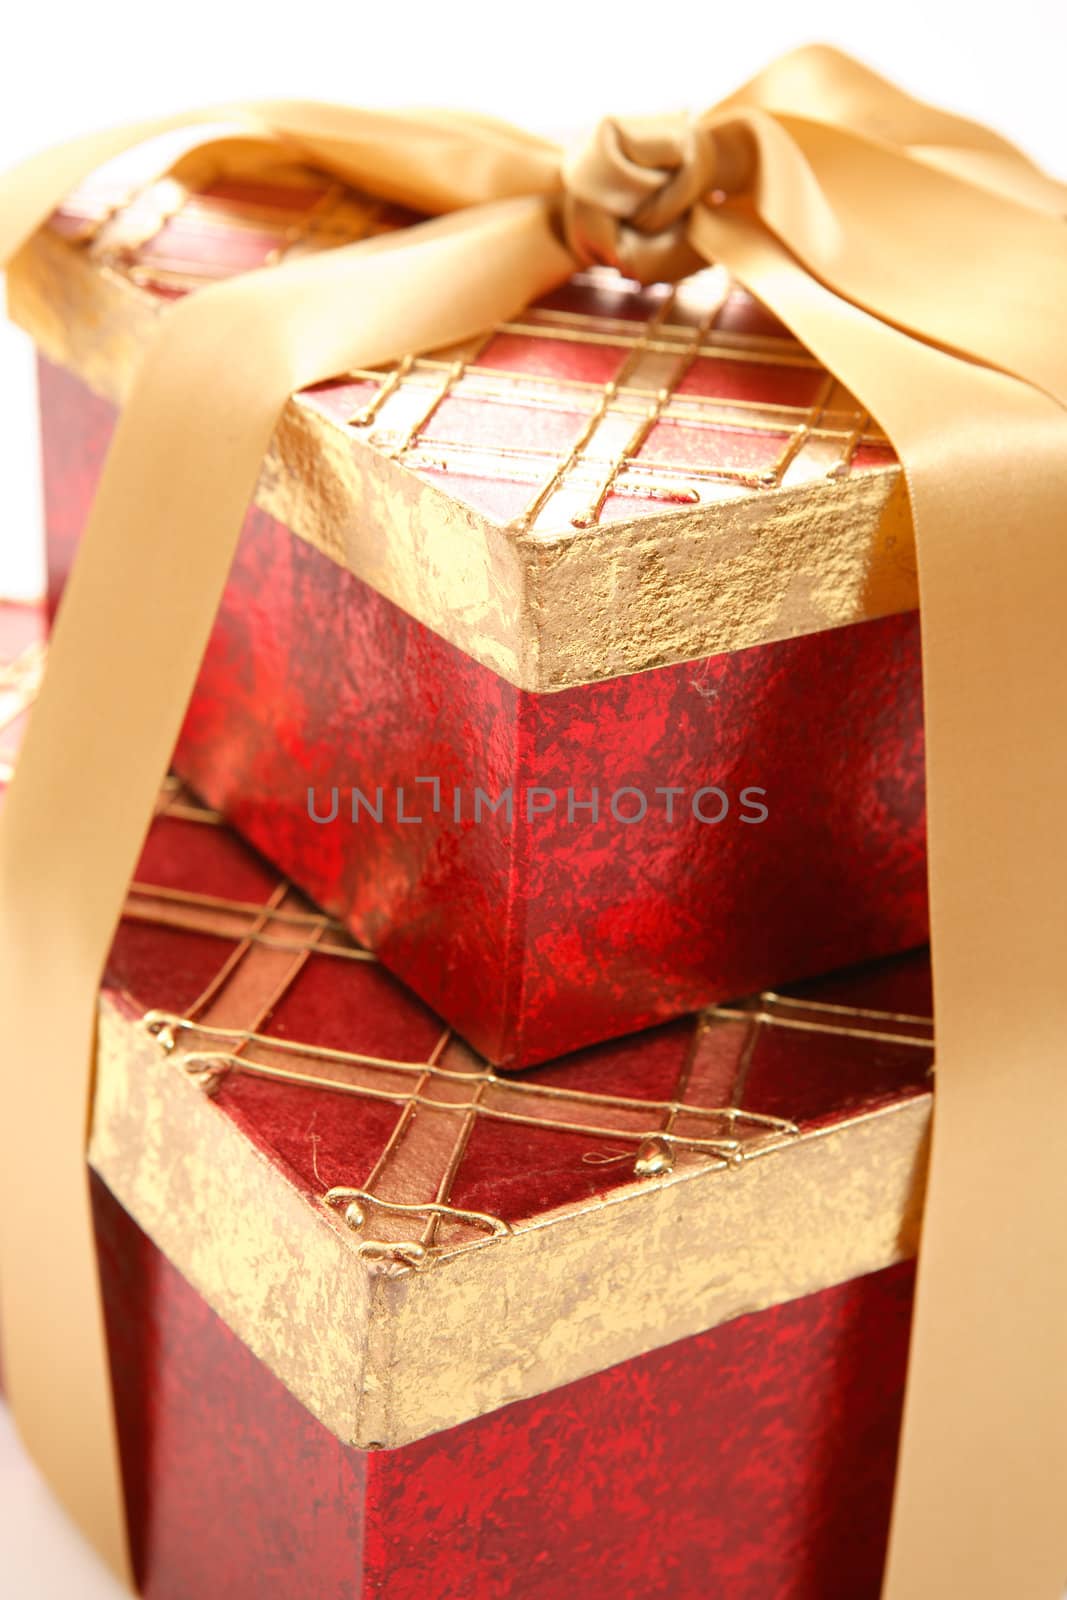 Red and gold gifts closeup with shallow dof.